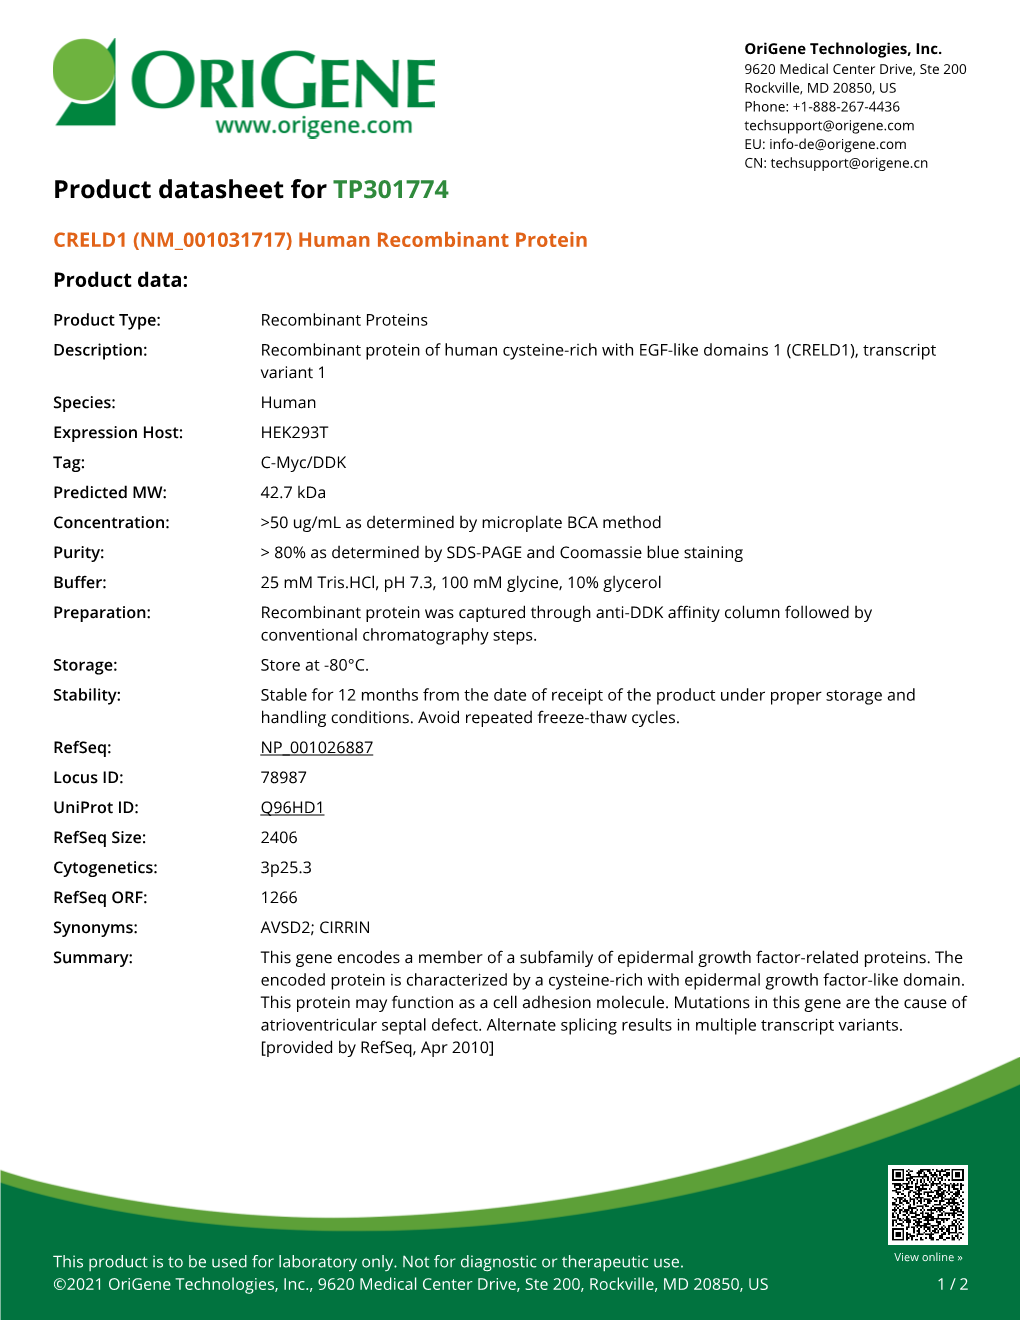 CRELD1 (NM 001031717) Human Recombinant Protein Product Data